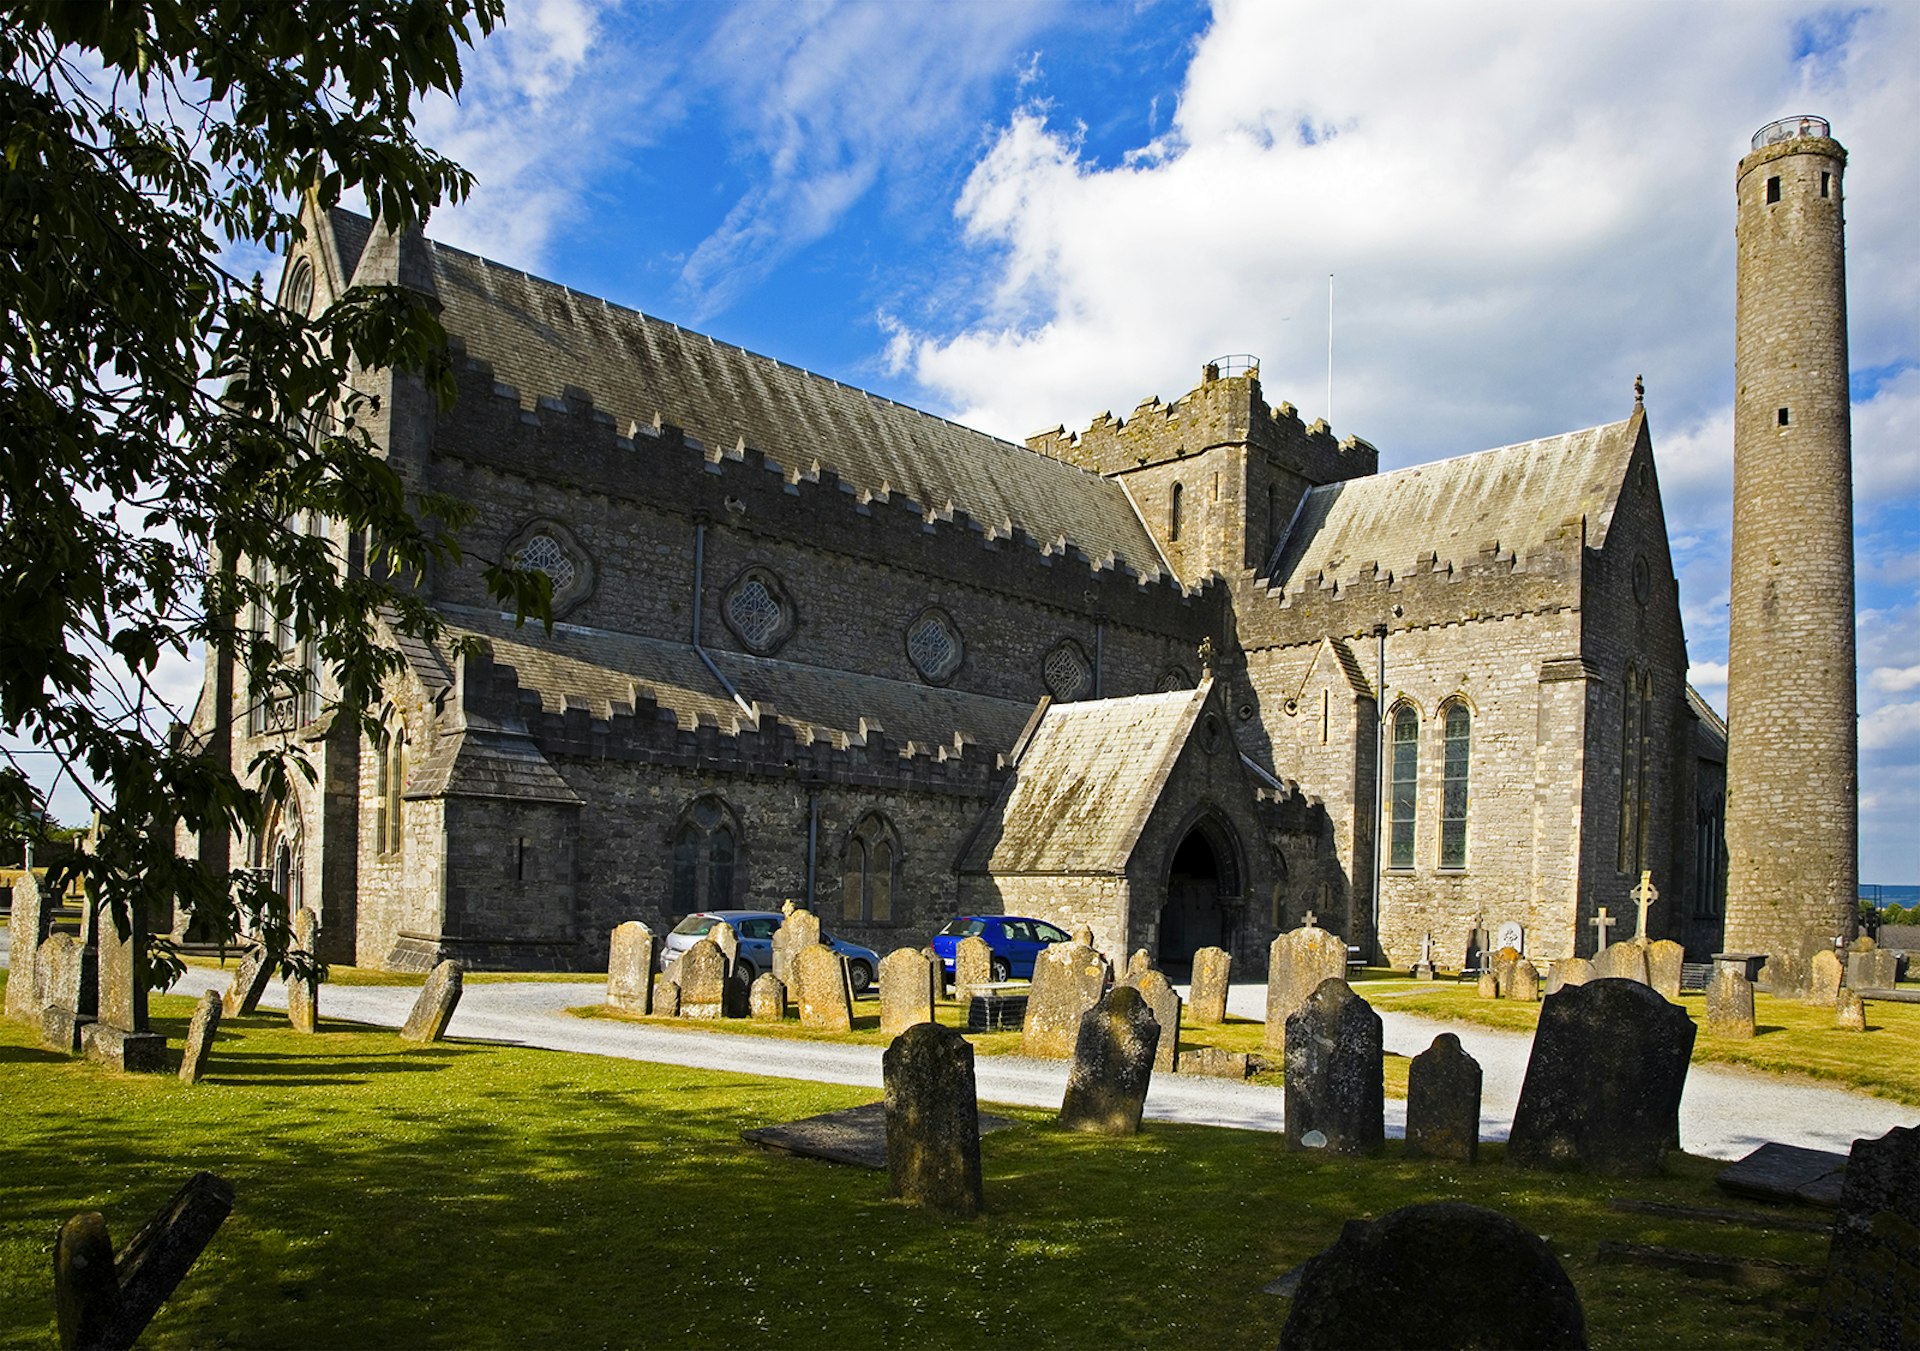 Kilkenny's Cathedral of St Canice